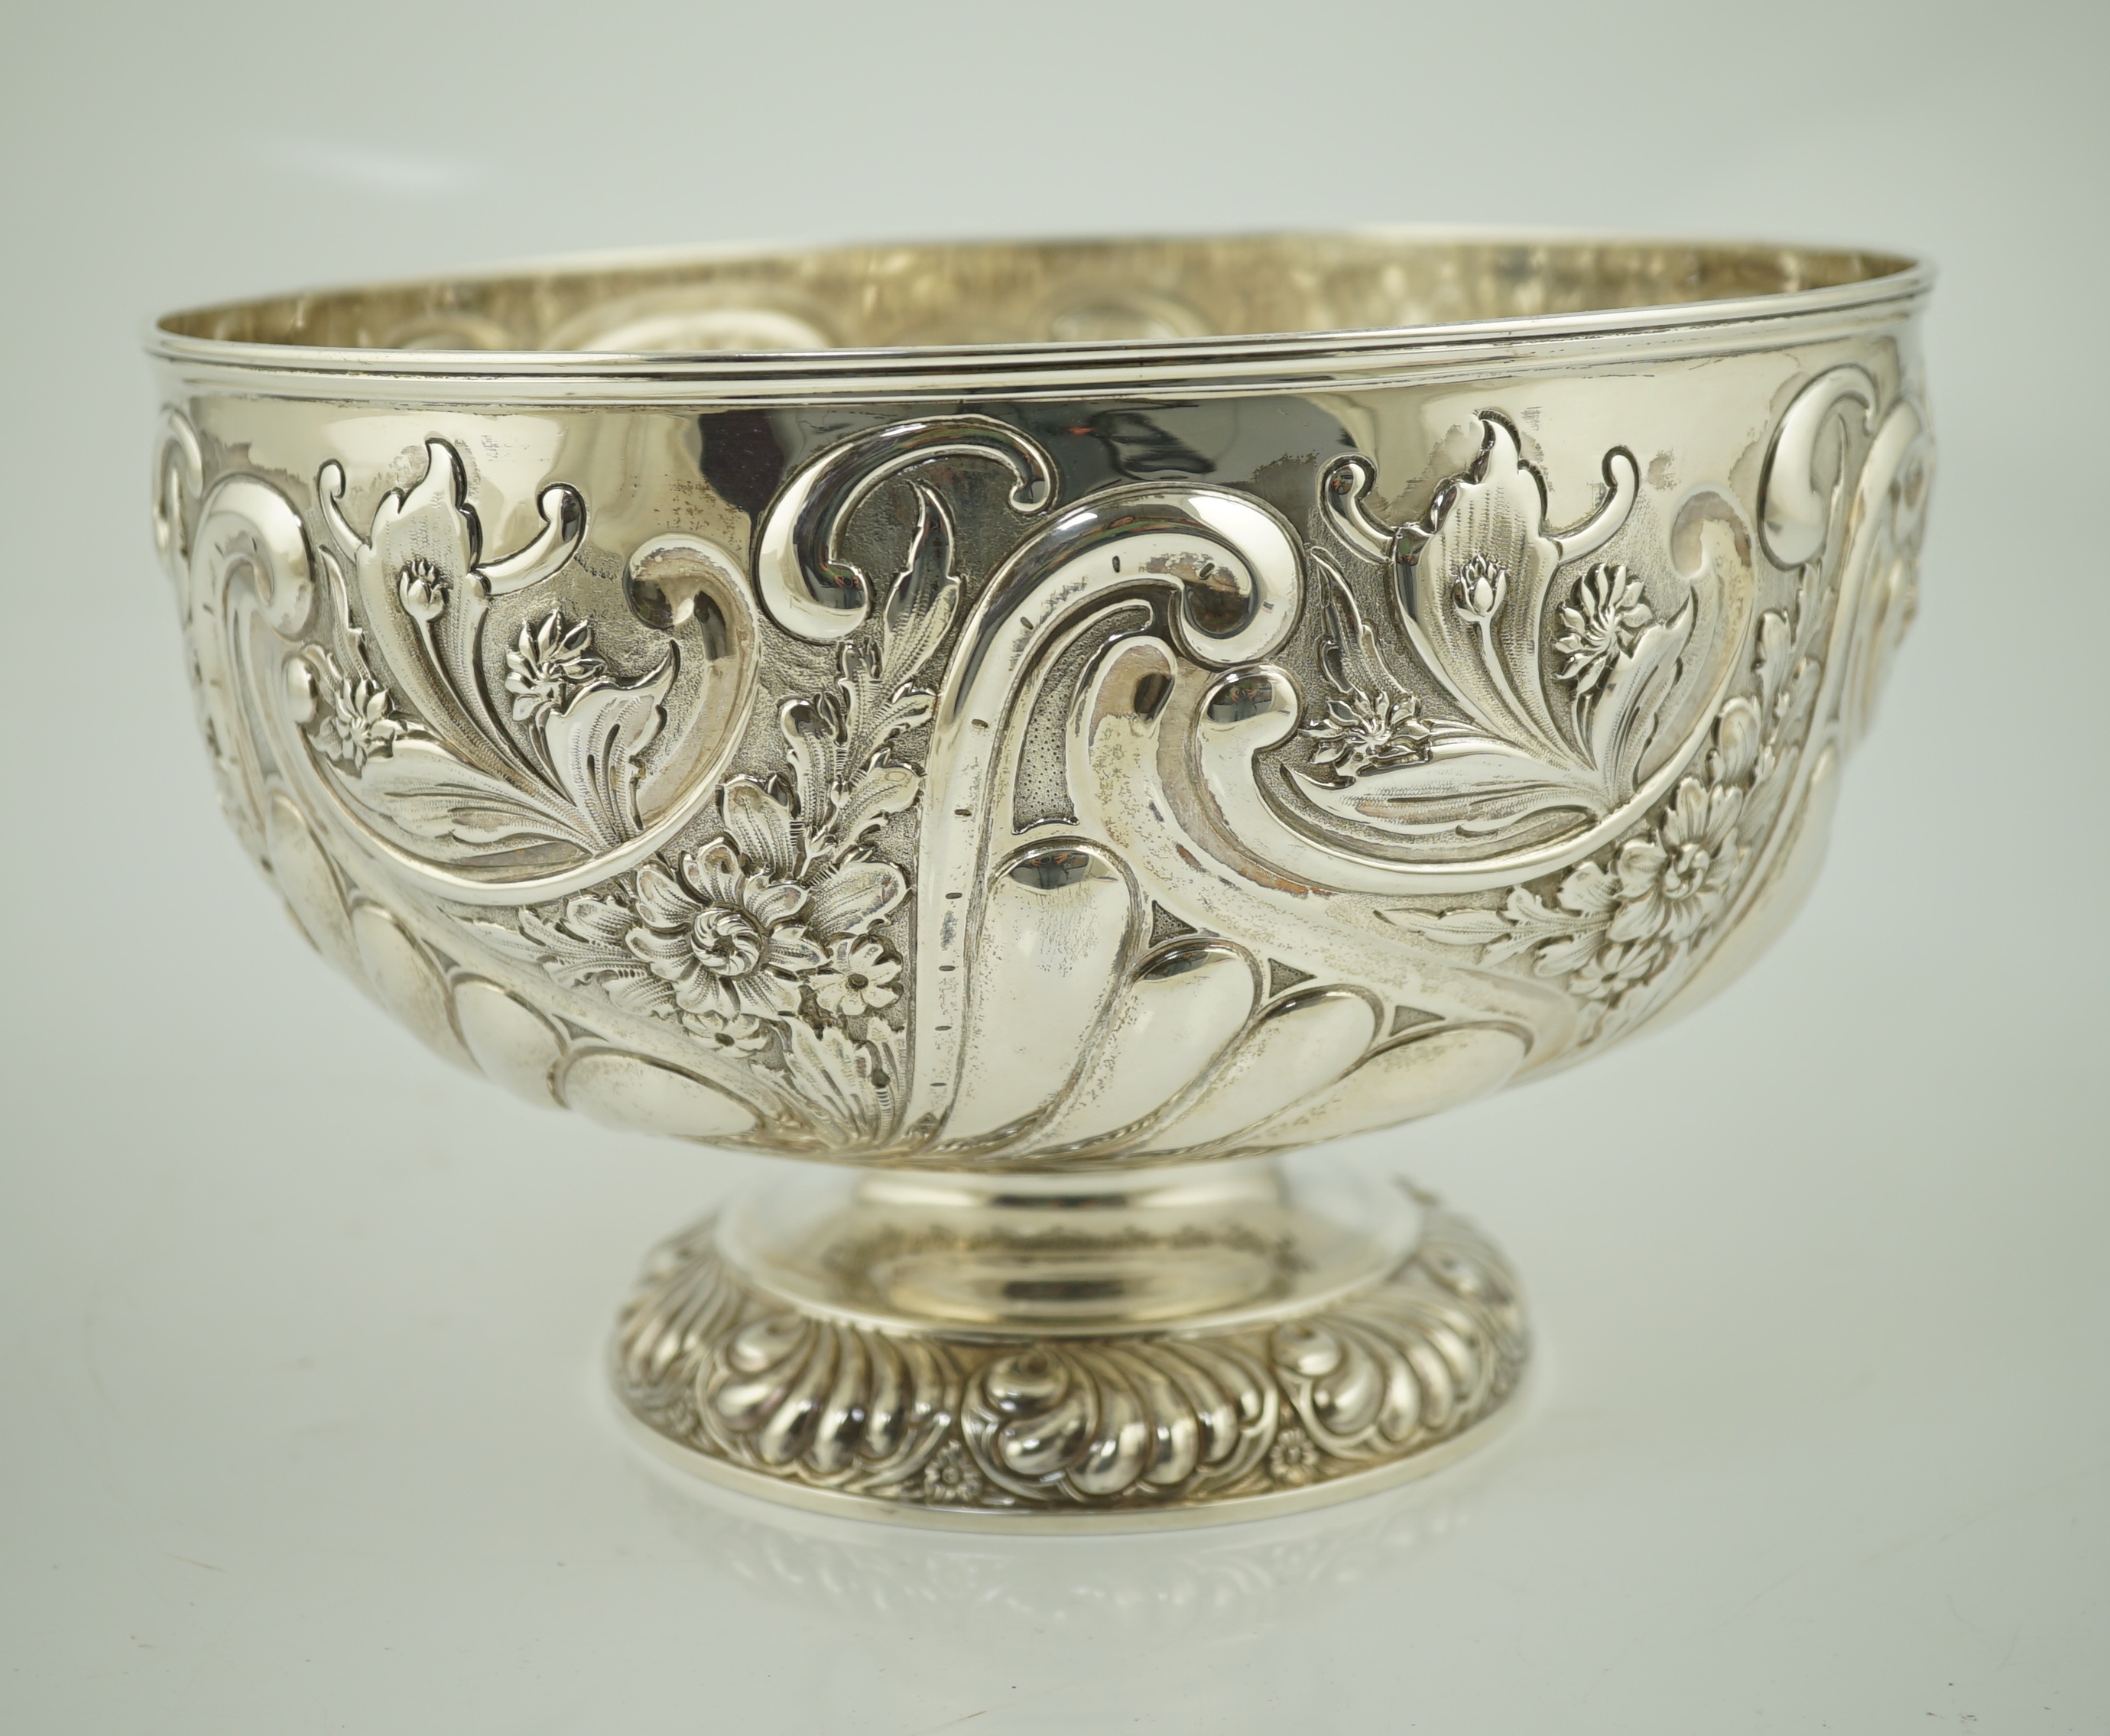 A late Victorian repousse silver rose bowl, by William Hutton & Sons